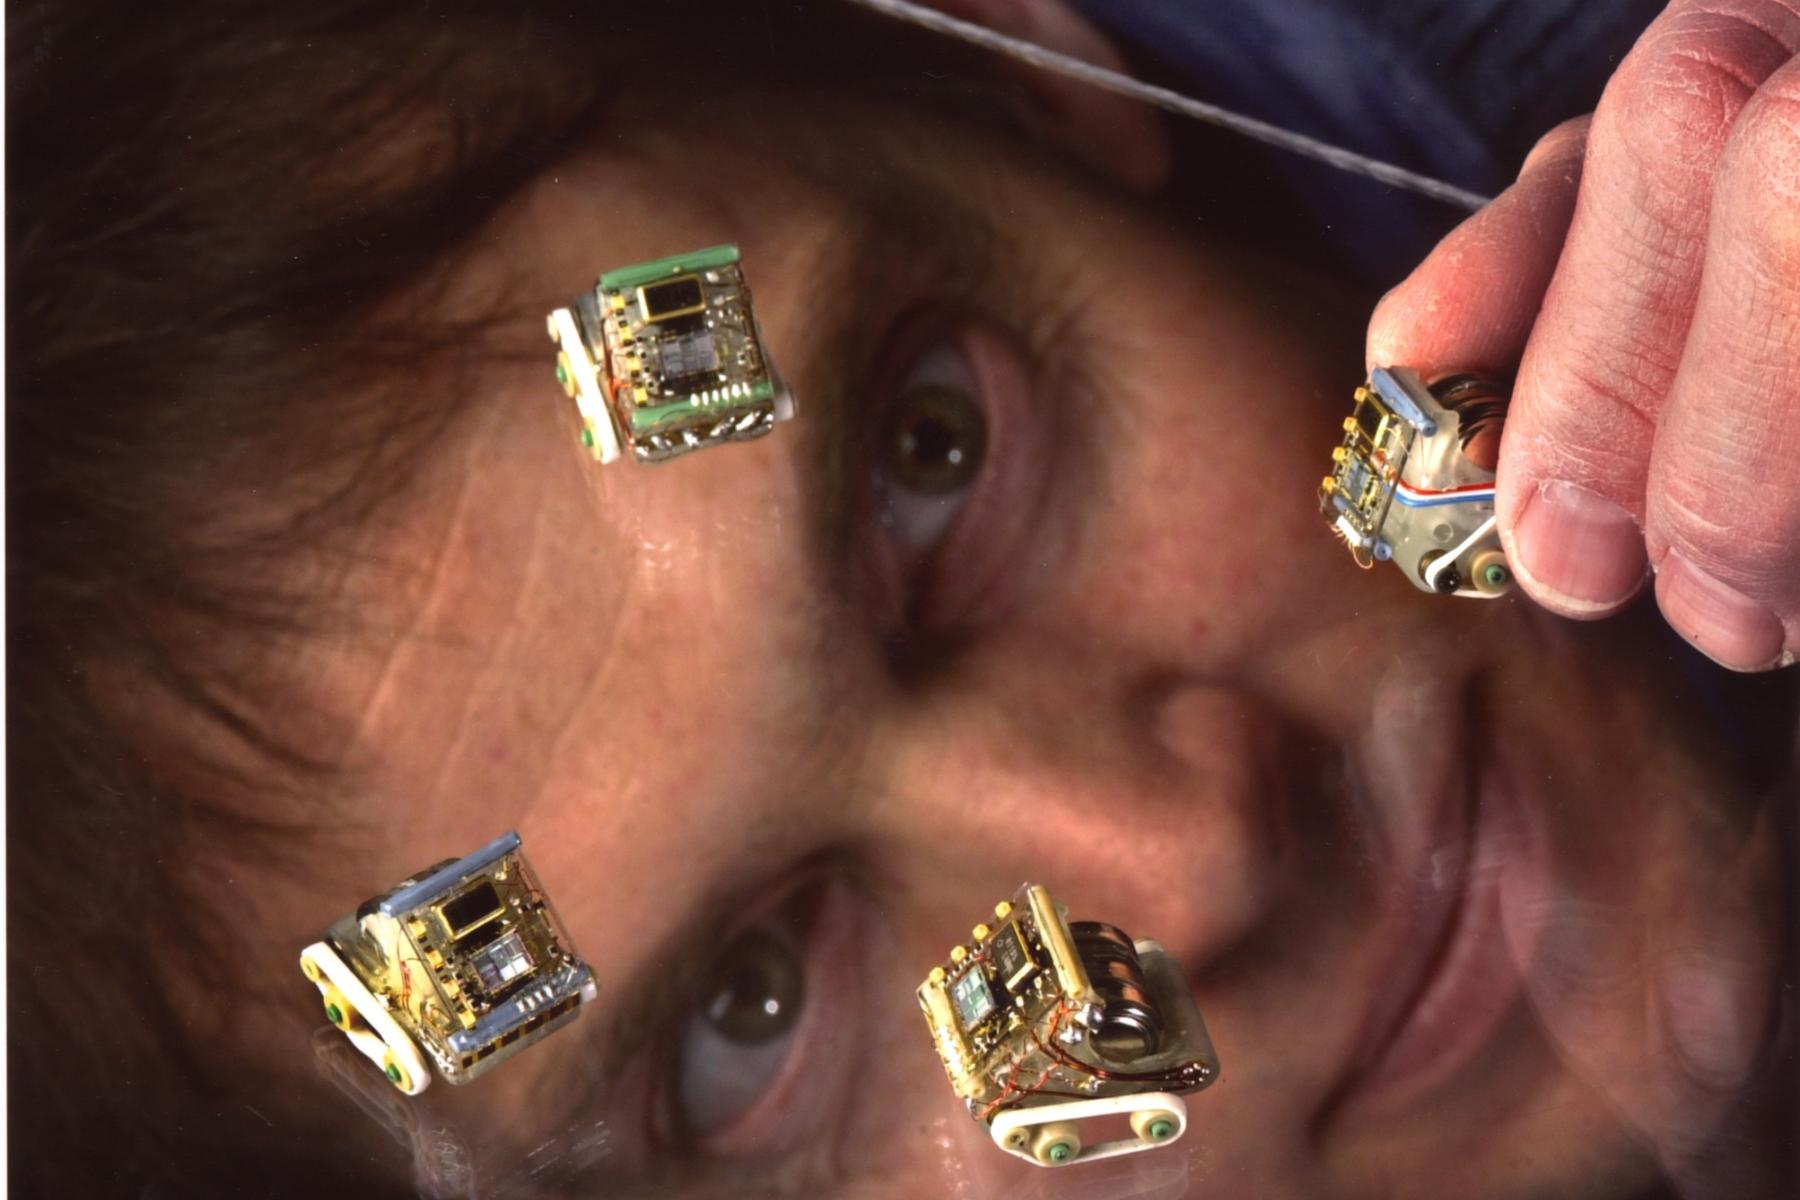 A person with computer chips stuck on their face